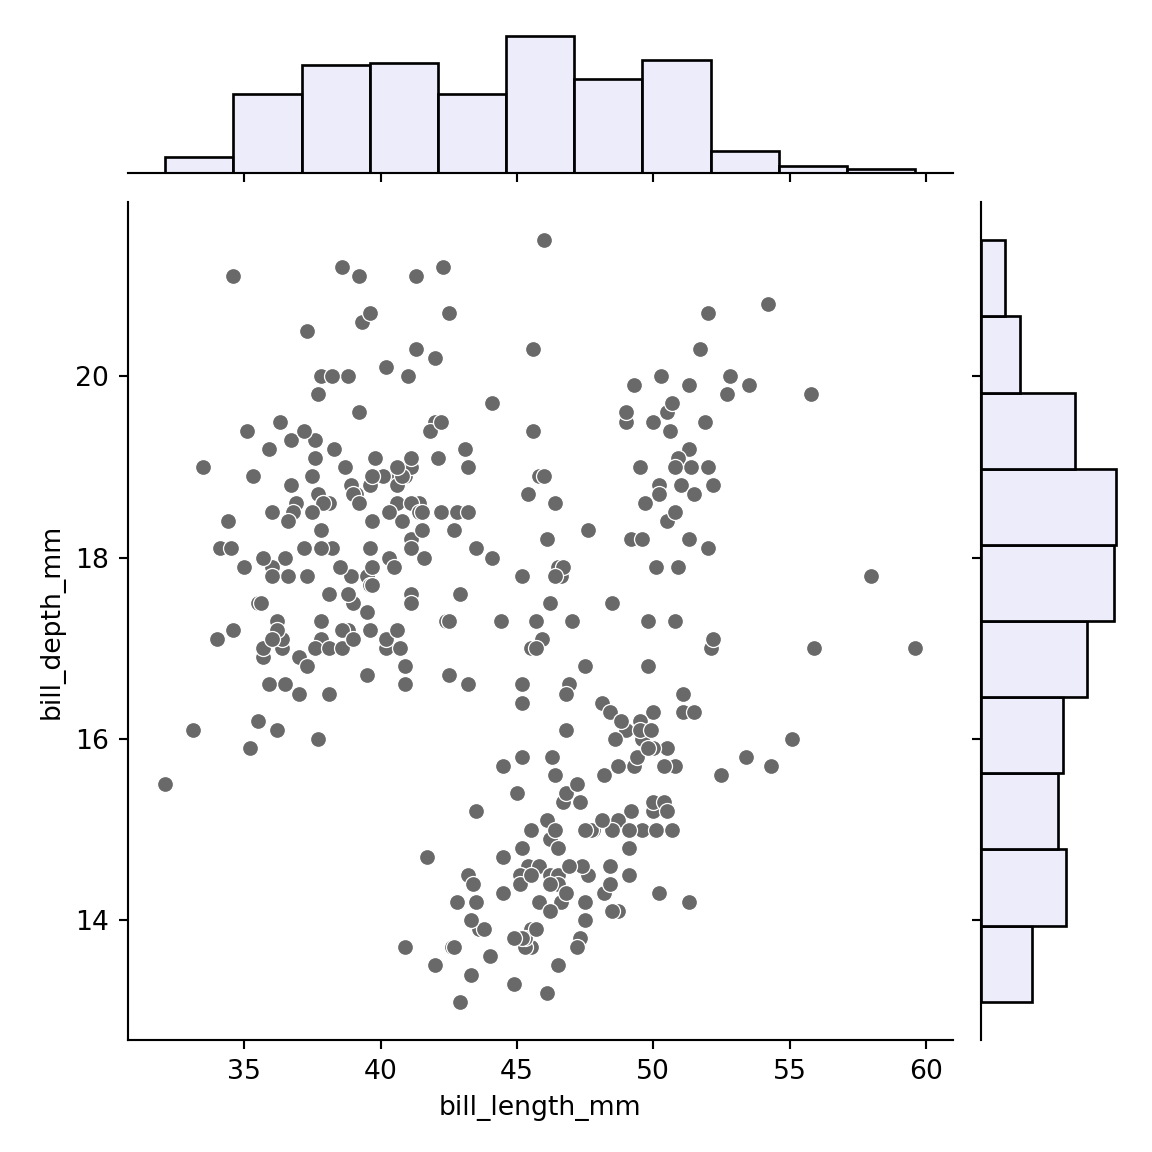 Change the color of the marginal histograms in seaborn